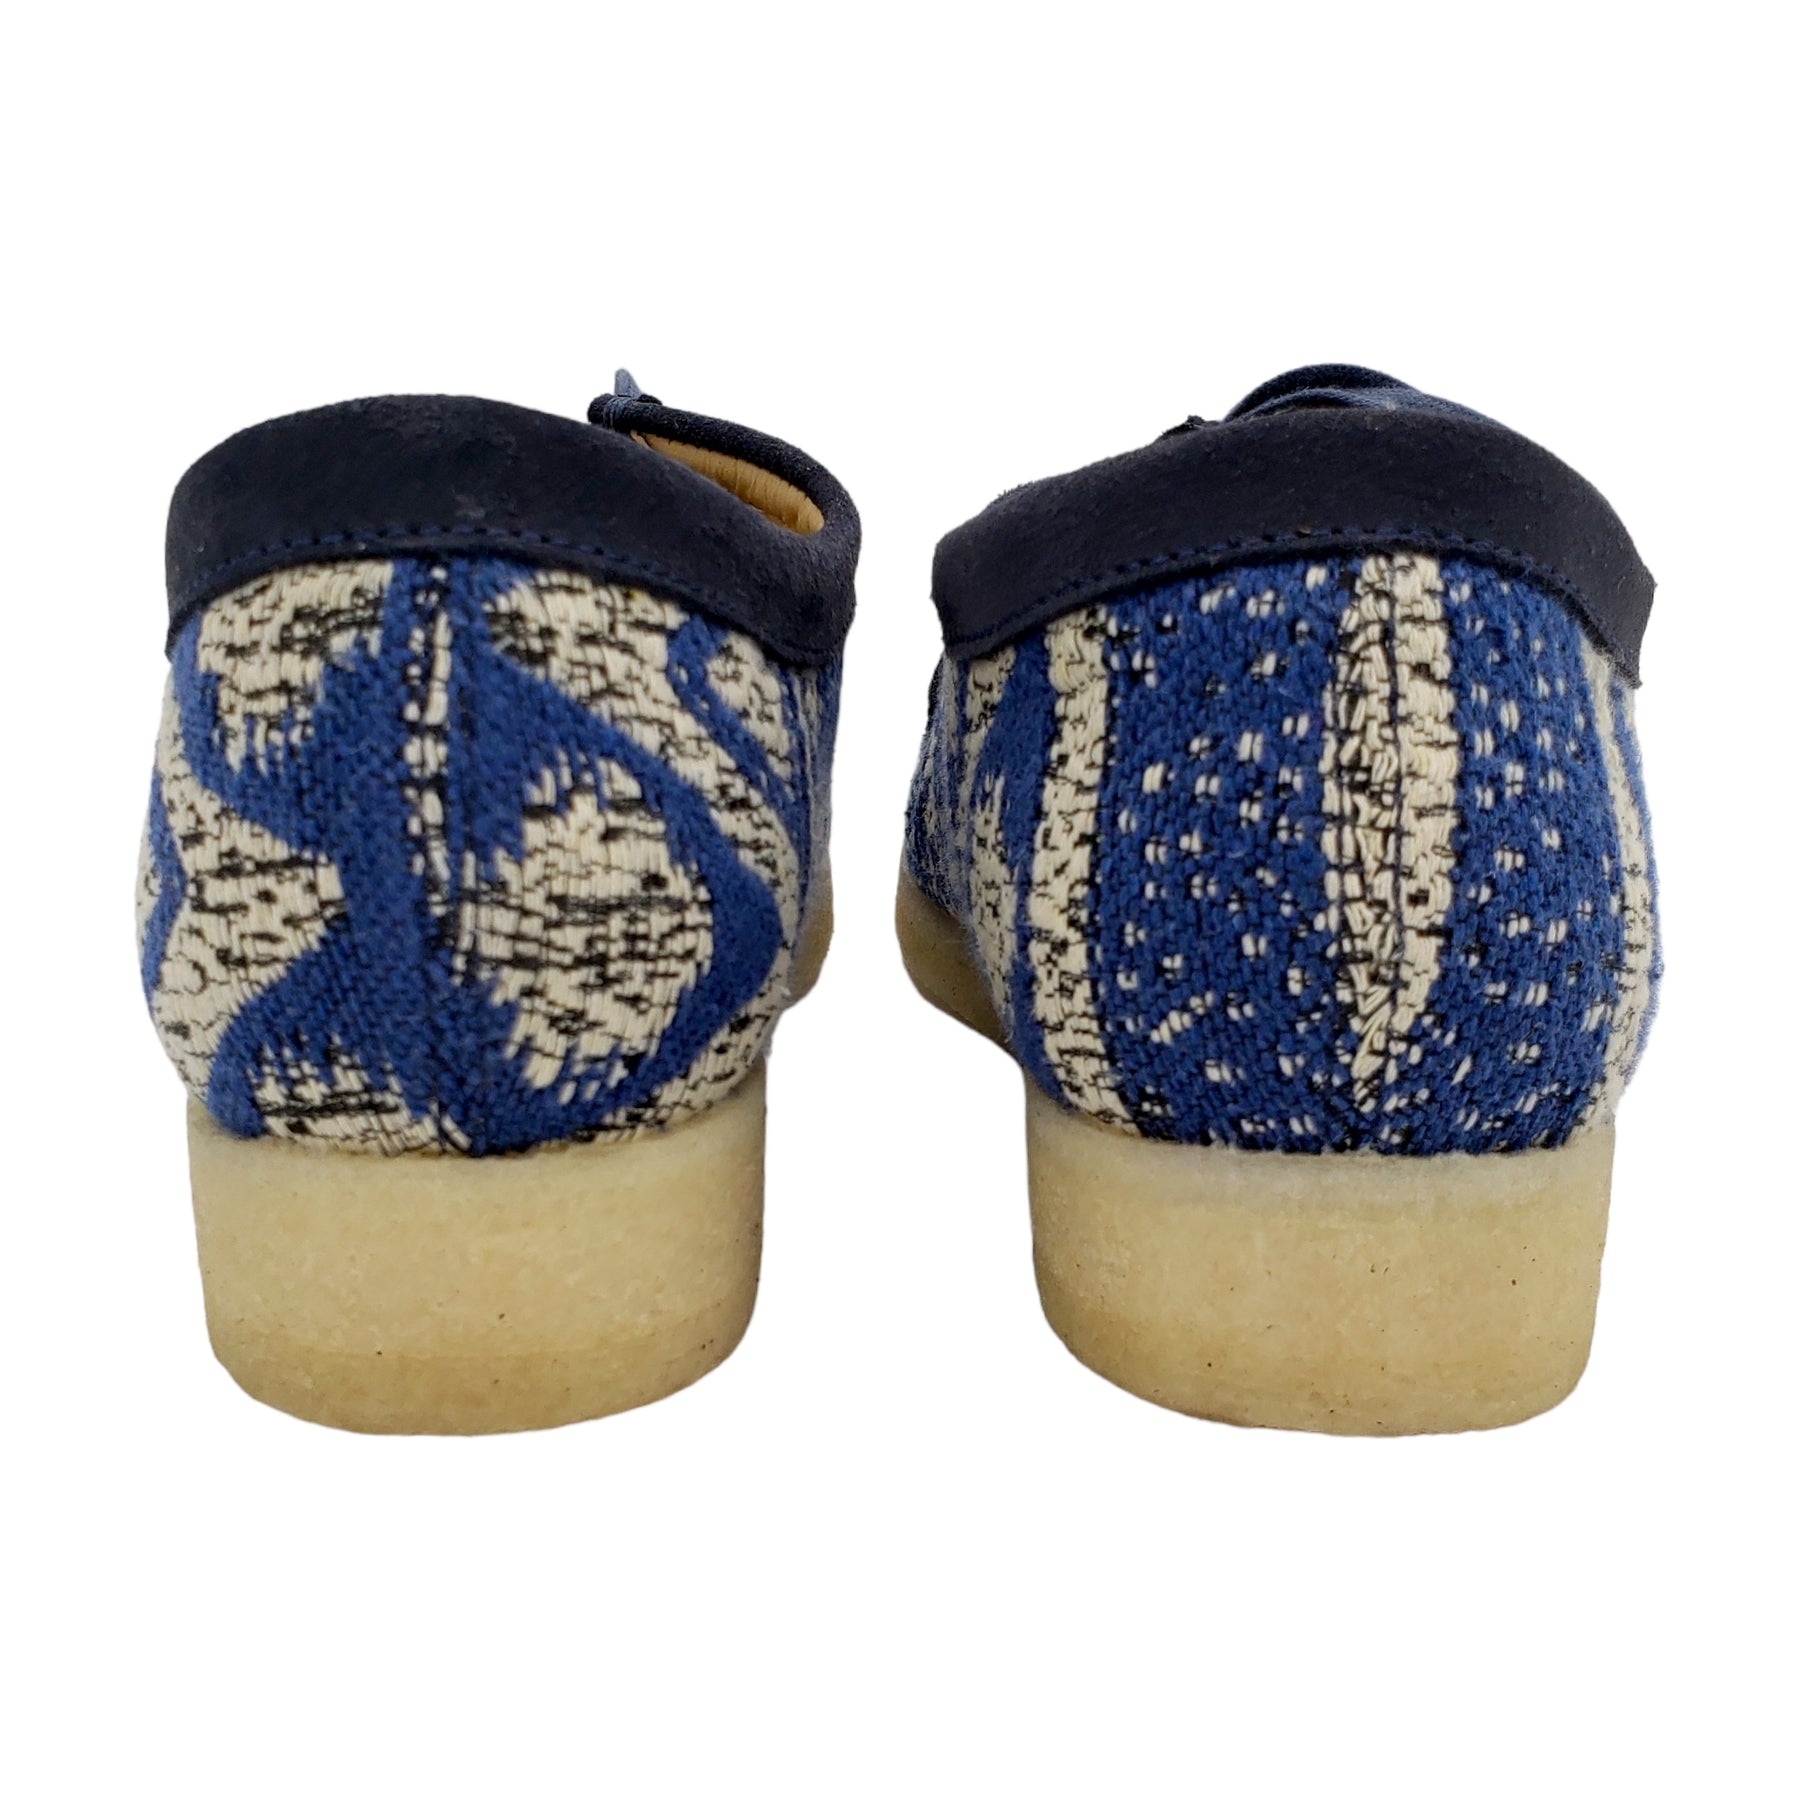 Clarks Wallabies Blue & White Tapestry Boots